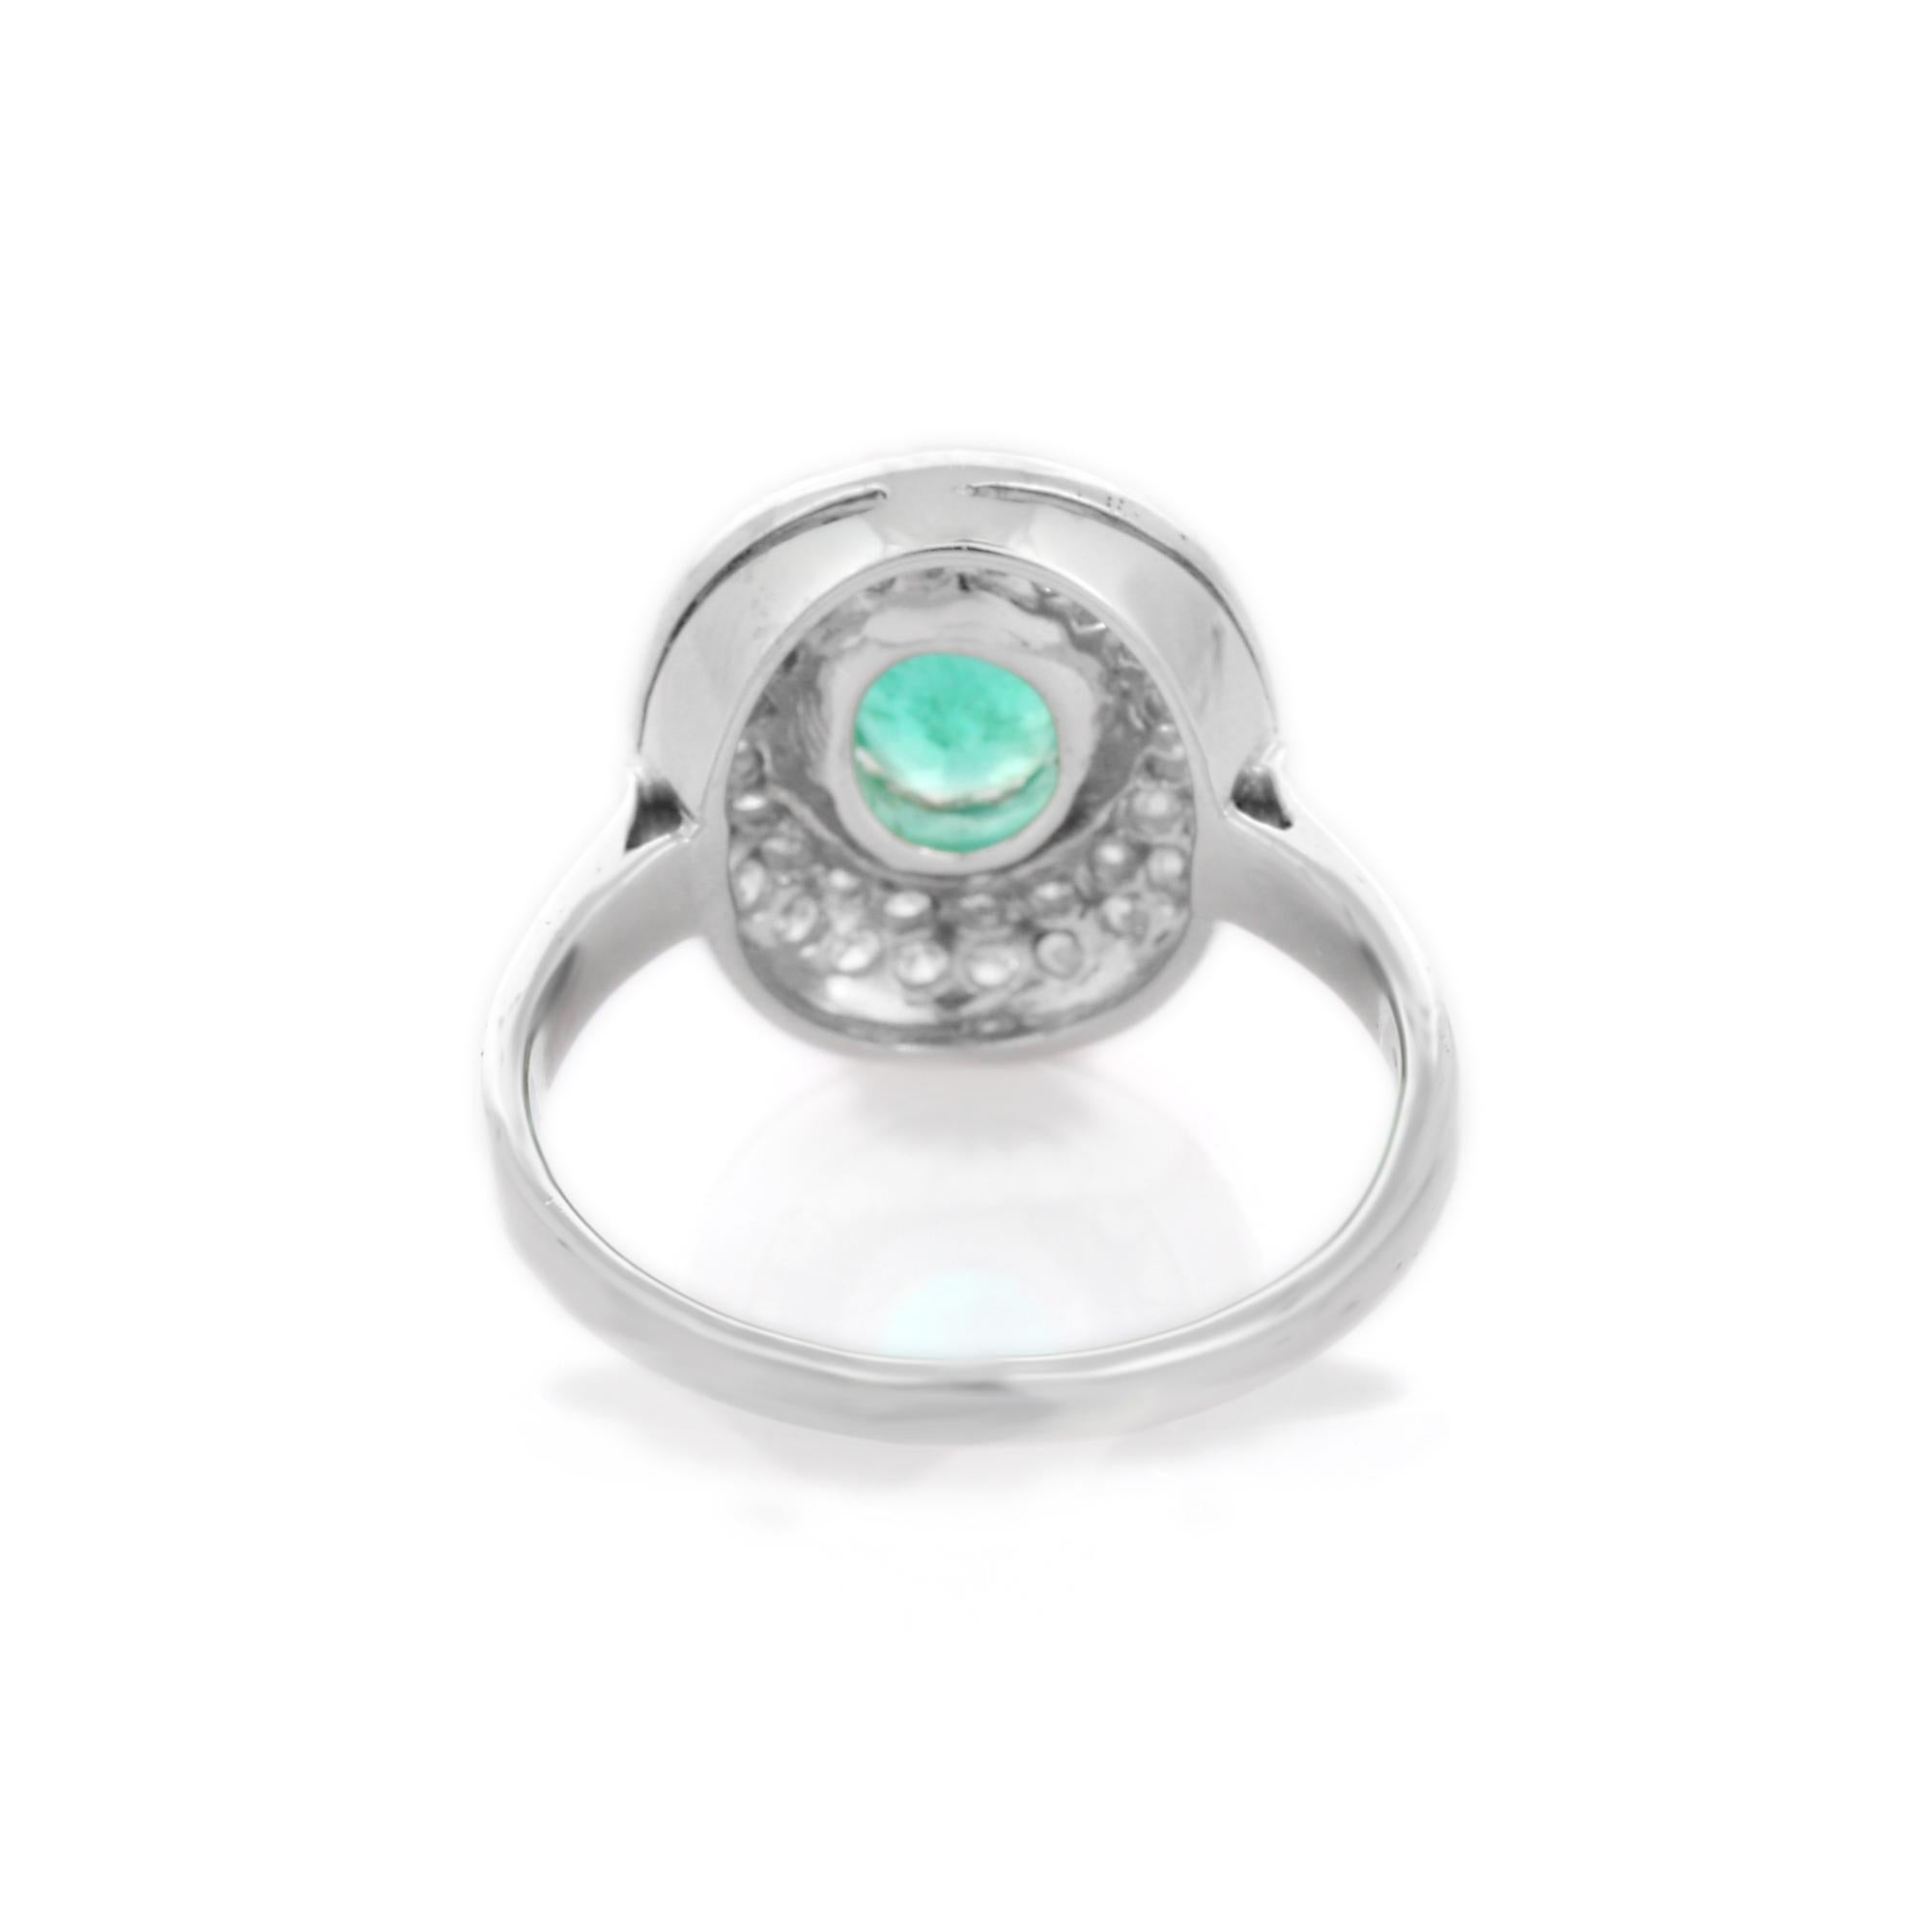 For Sale:  Big Emerald Cocktail Ring with Diamonds in 18K White Gold 5